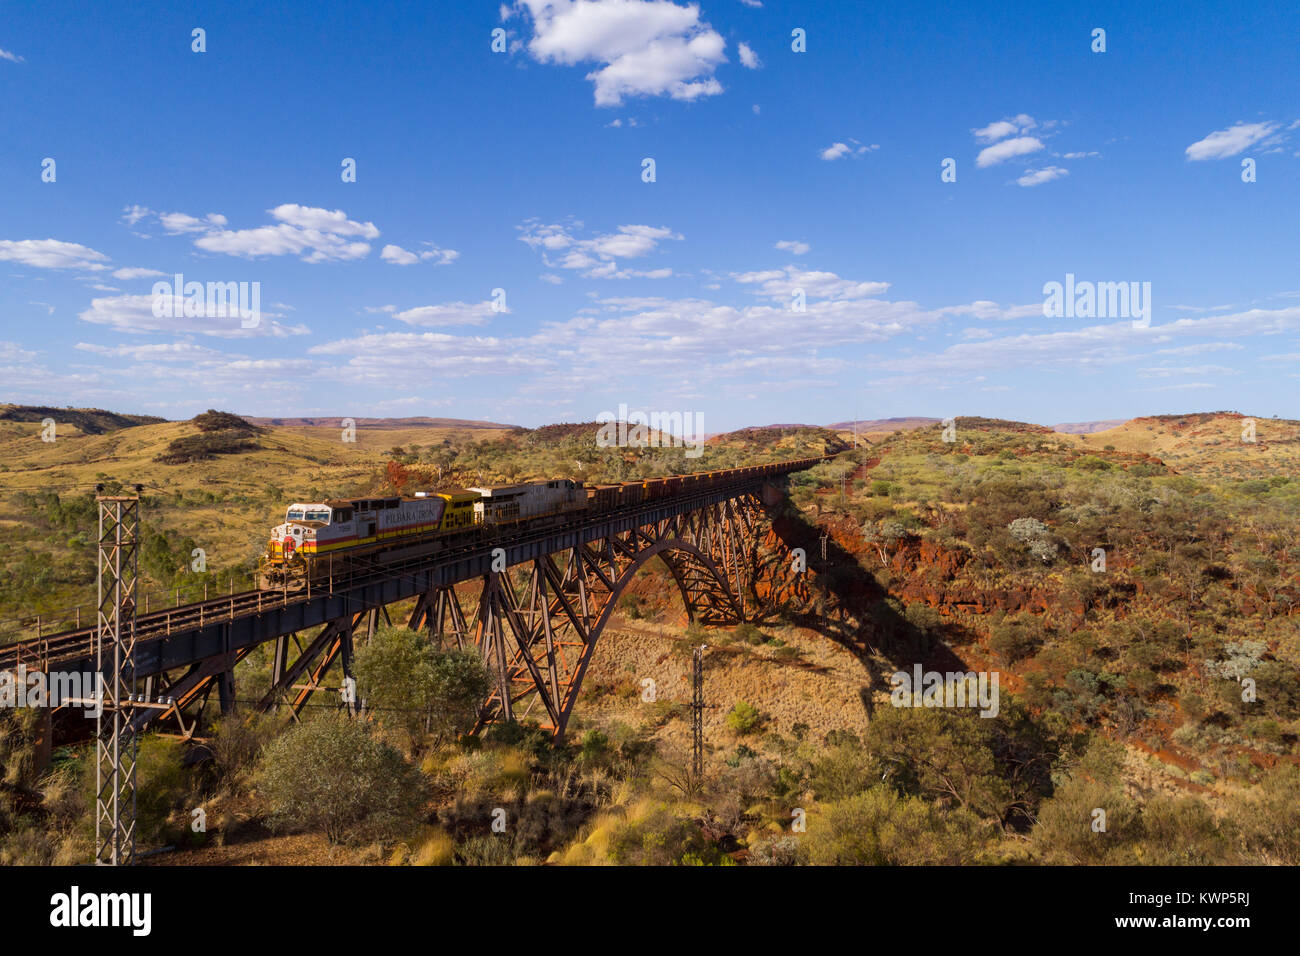 Iron Ore train crossing over the largest privately owned single span railway bridge in the southern hemisphere, Pilbara, Western Australia Stock Photo